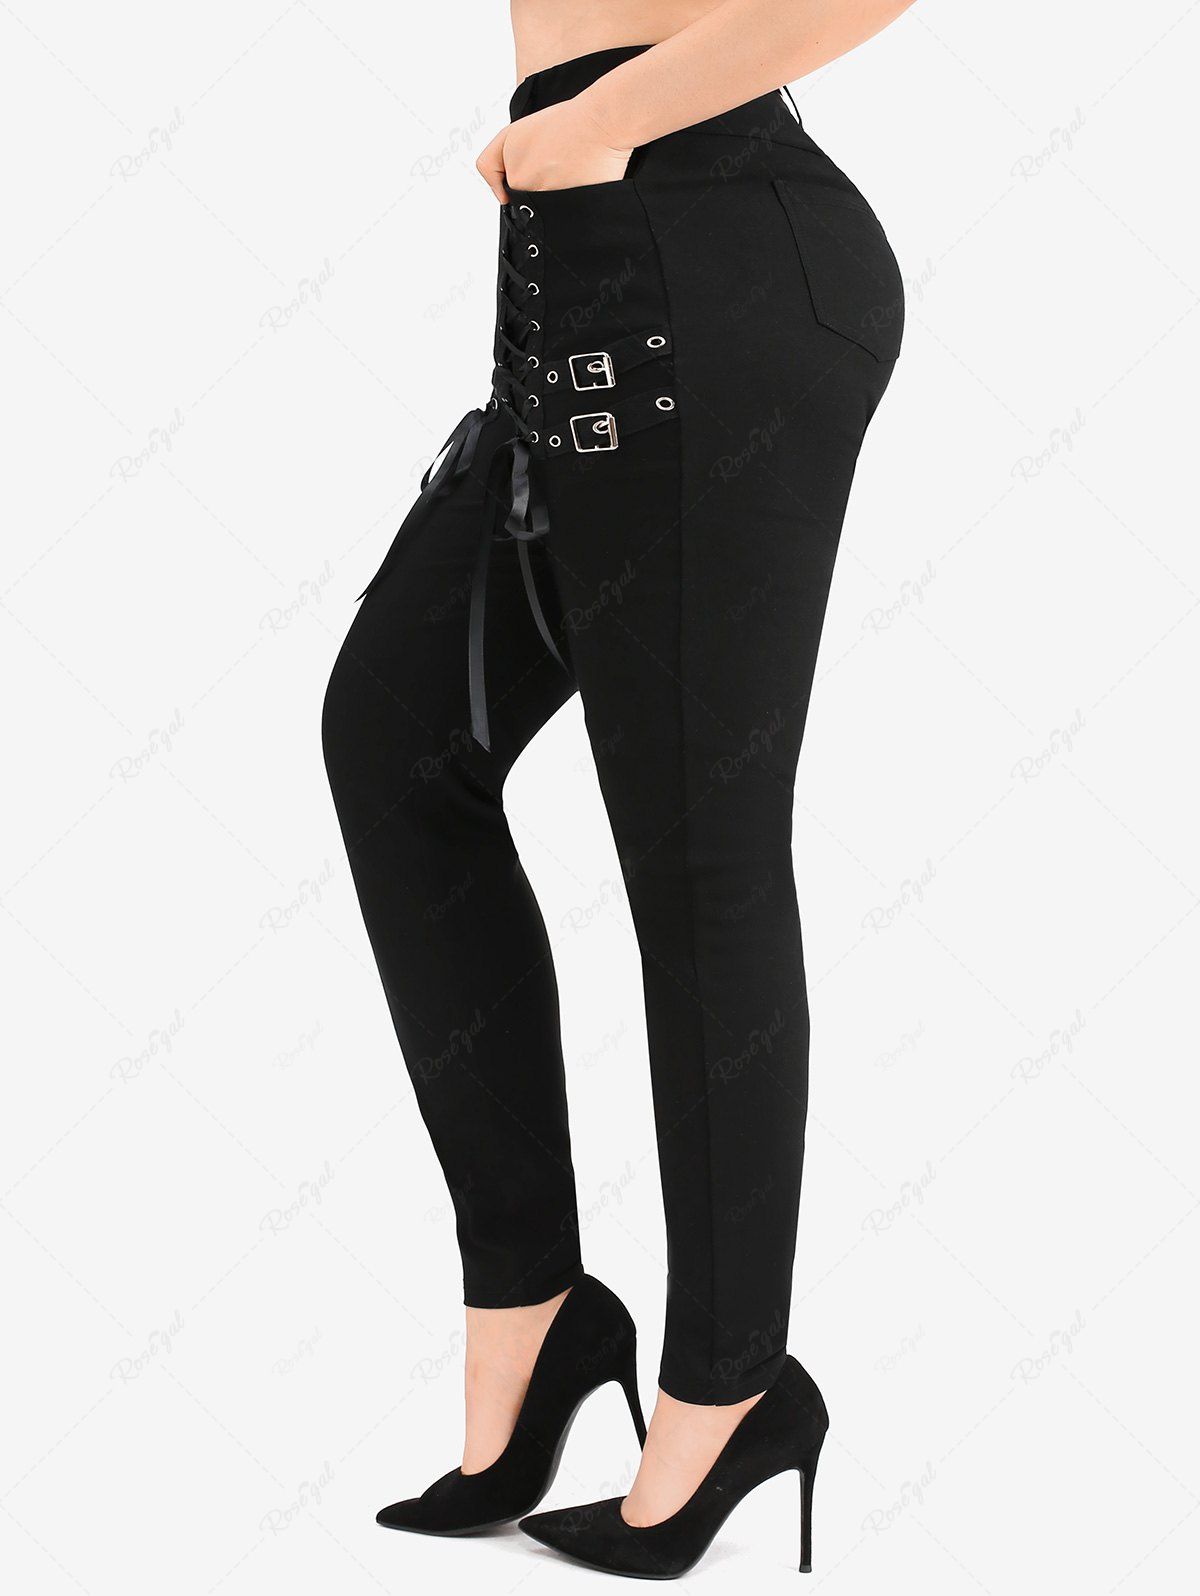 Cheap Plus Size Lace Up Pockets Buckle Pull On Leggings  